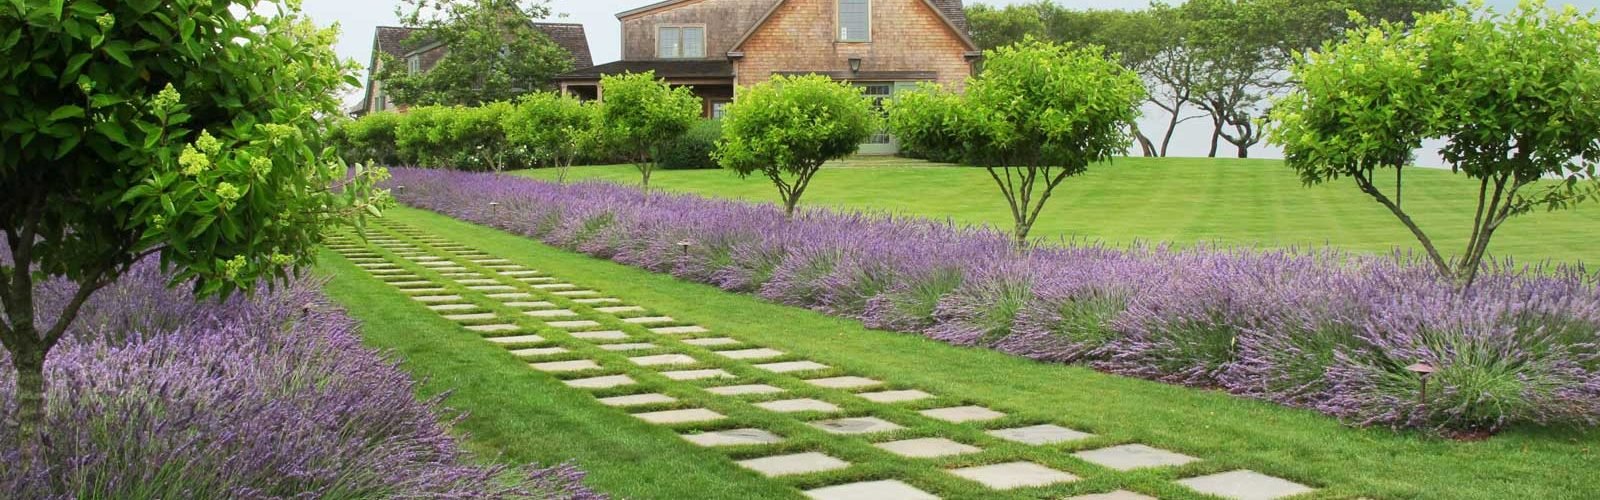 Lawn into Gardening Space